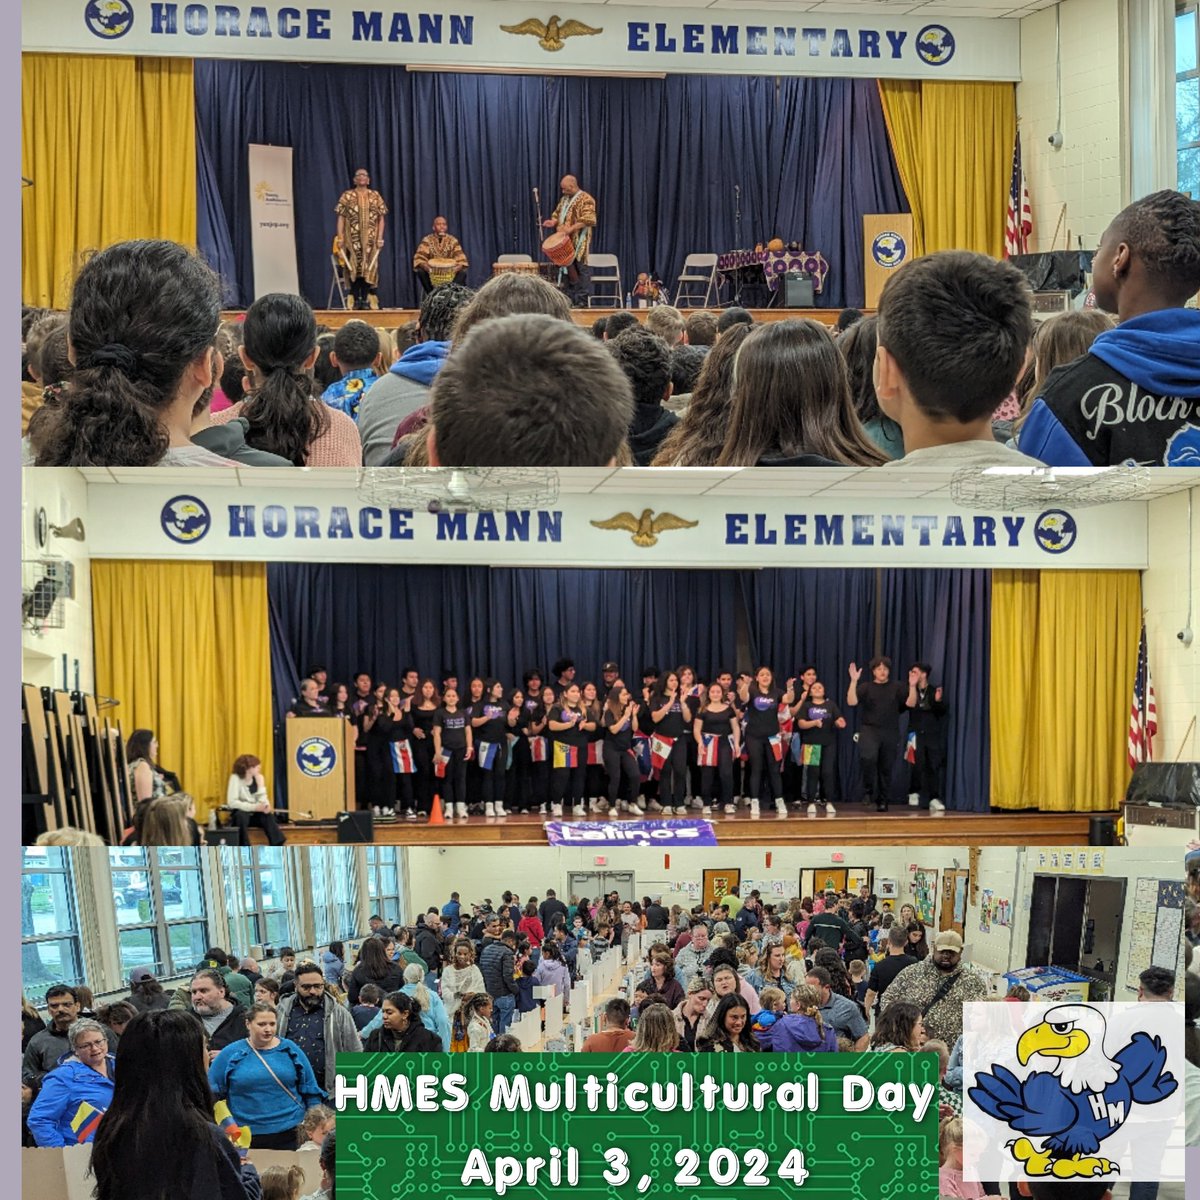 Our Multicultural Day was amazing! A West African Drum & Dance Assembly, Performance from Latinos @CherryHillWest, and our Student & Family culture poster walk were all so enriching. What a great day of celebrating diversity! Thank you @CHEdFoundation for helping fund the day!